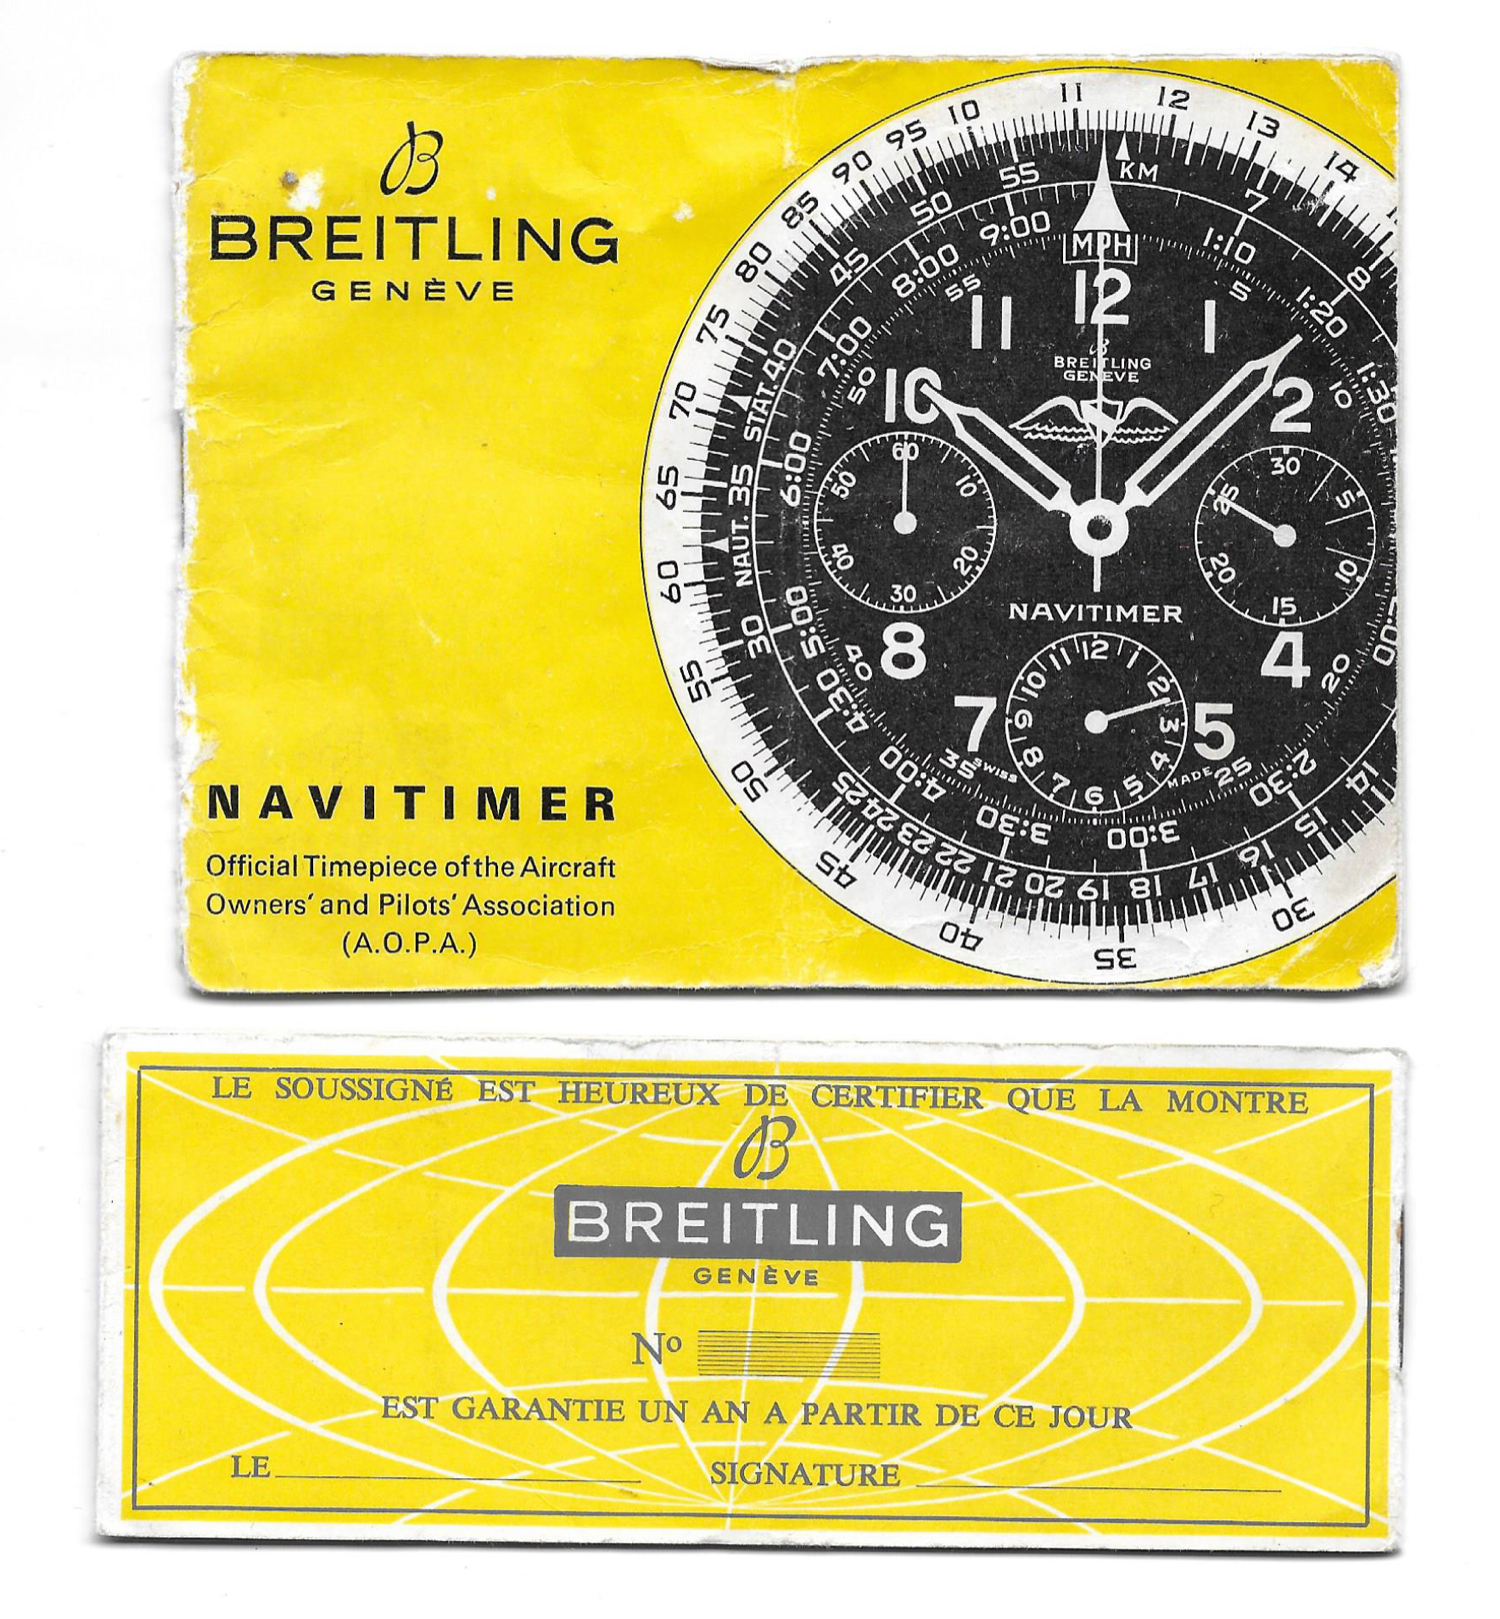 A RARE GENTLEMAN'S STAINLESS STEEL BREITLING NAVITIMER CHRONOGRAPH WRIST WATCH CIRCA 1960s, REF. 806 - Image 2 of 2